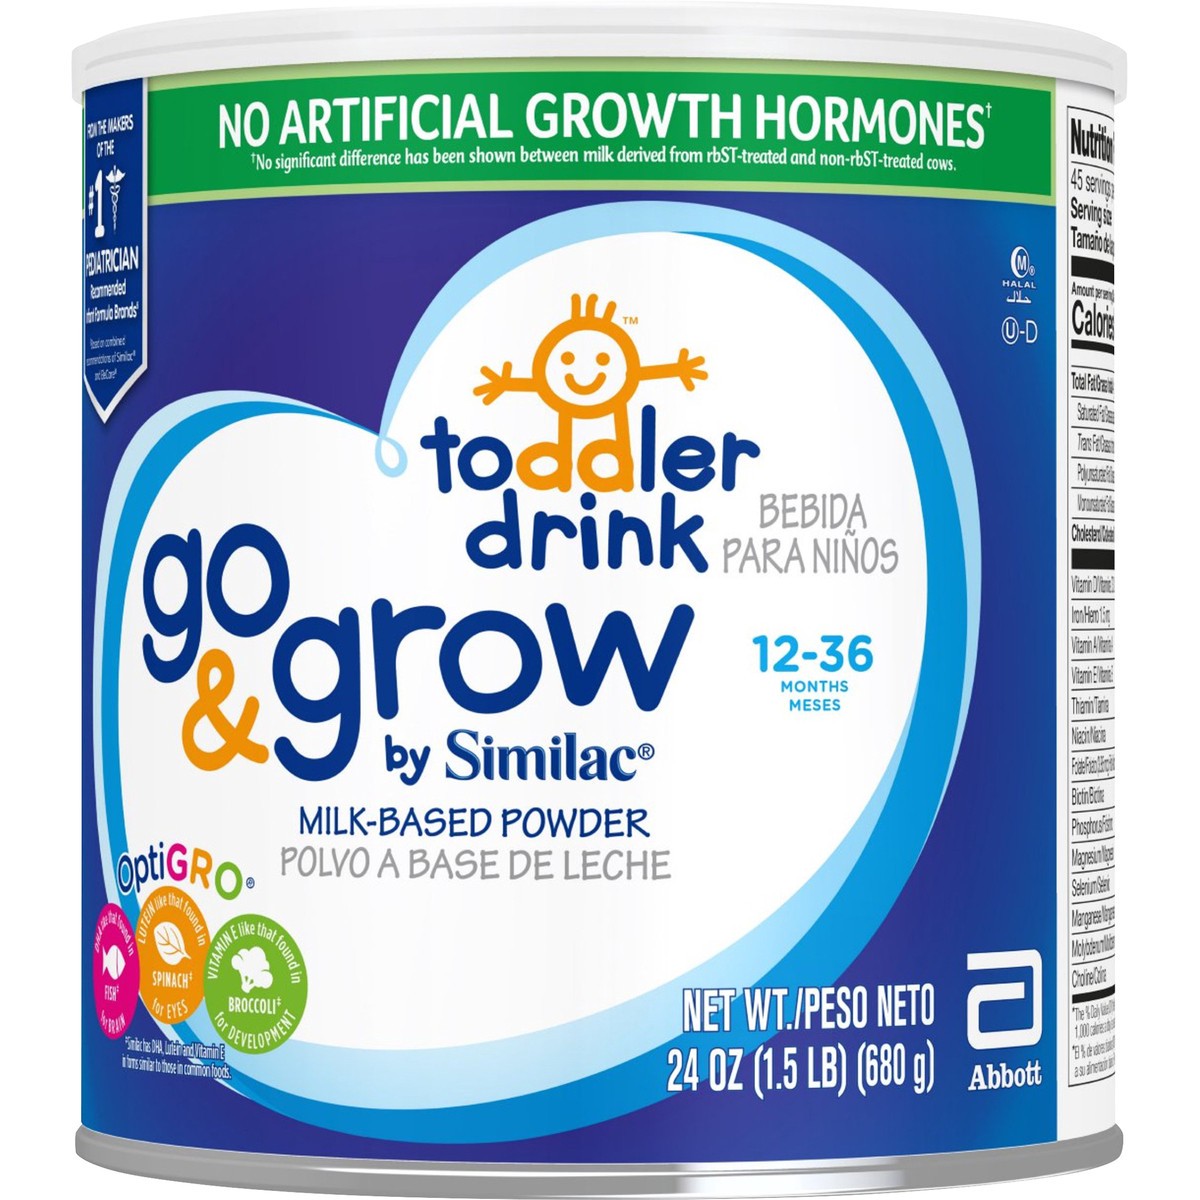 slide 11 of 13, Similac Go & Grow by Similac Toddler Drink Powder 24 oz Can, 24 oz